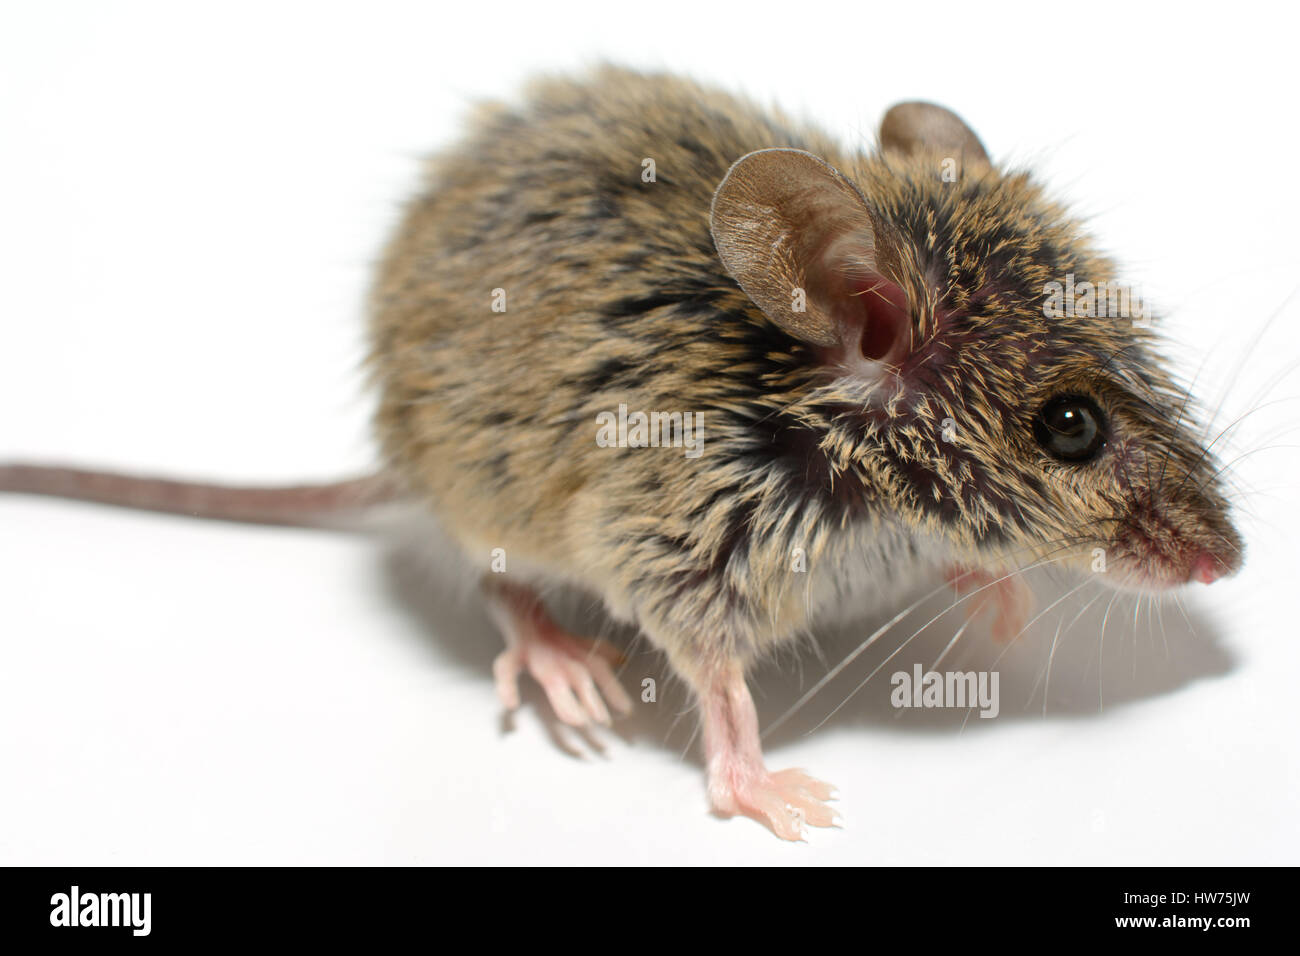 house mouse (Mus musculus) on white background Close-up side view Stock Photo